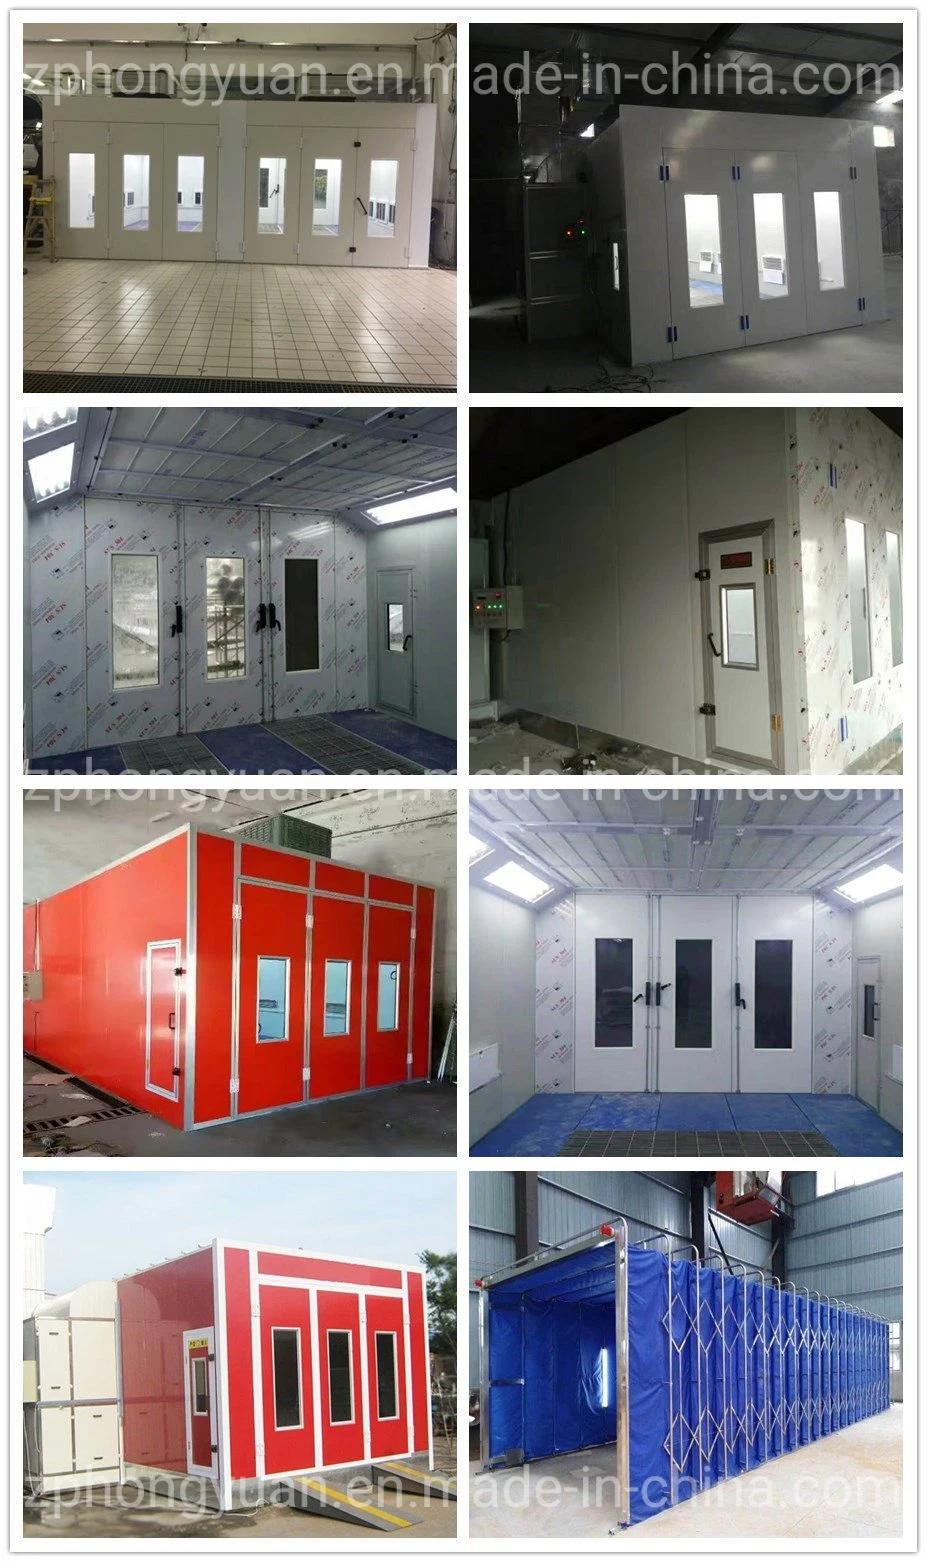 Car Paint Booth with Gas Diesel Burner and Heat Insulation Panel